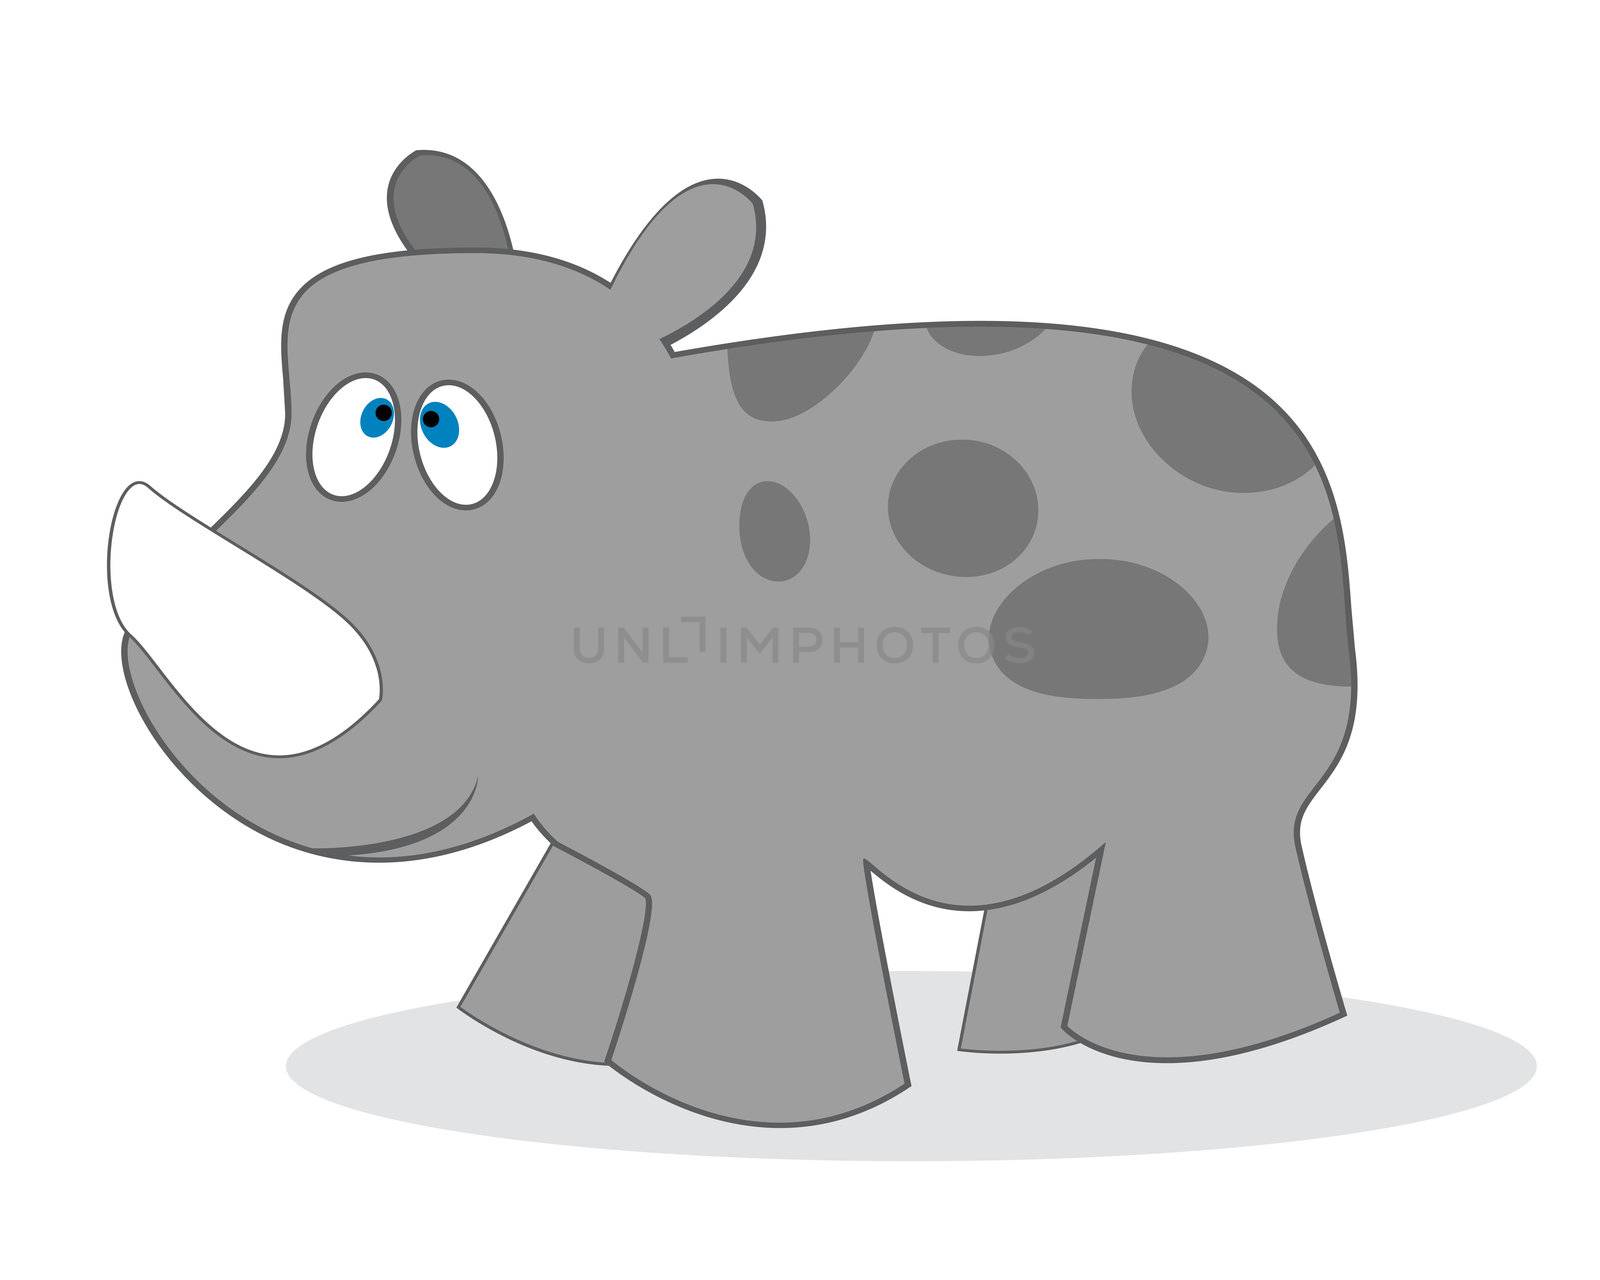 clip art rhino, isolated object over white background